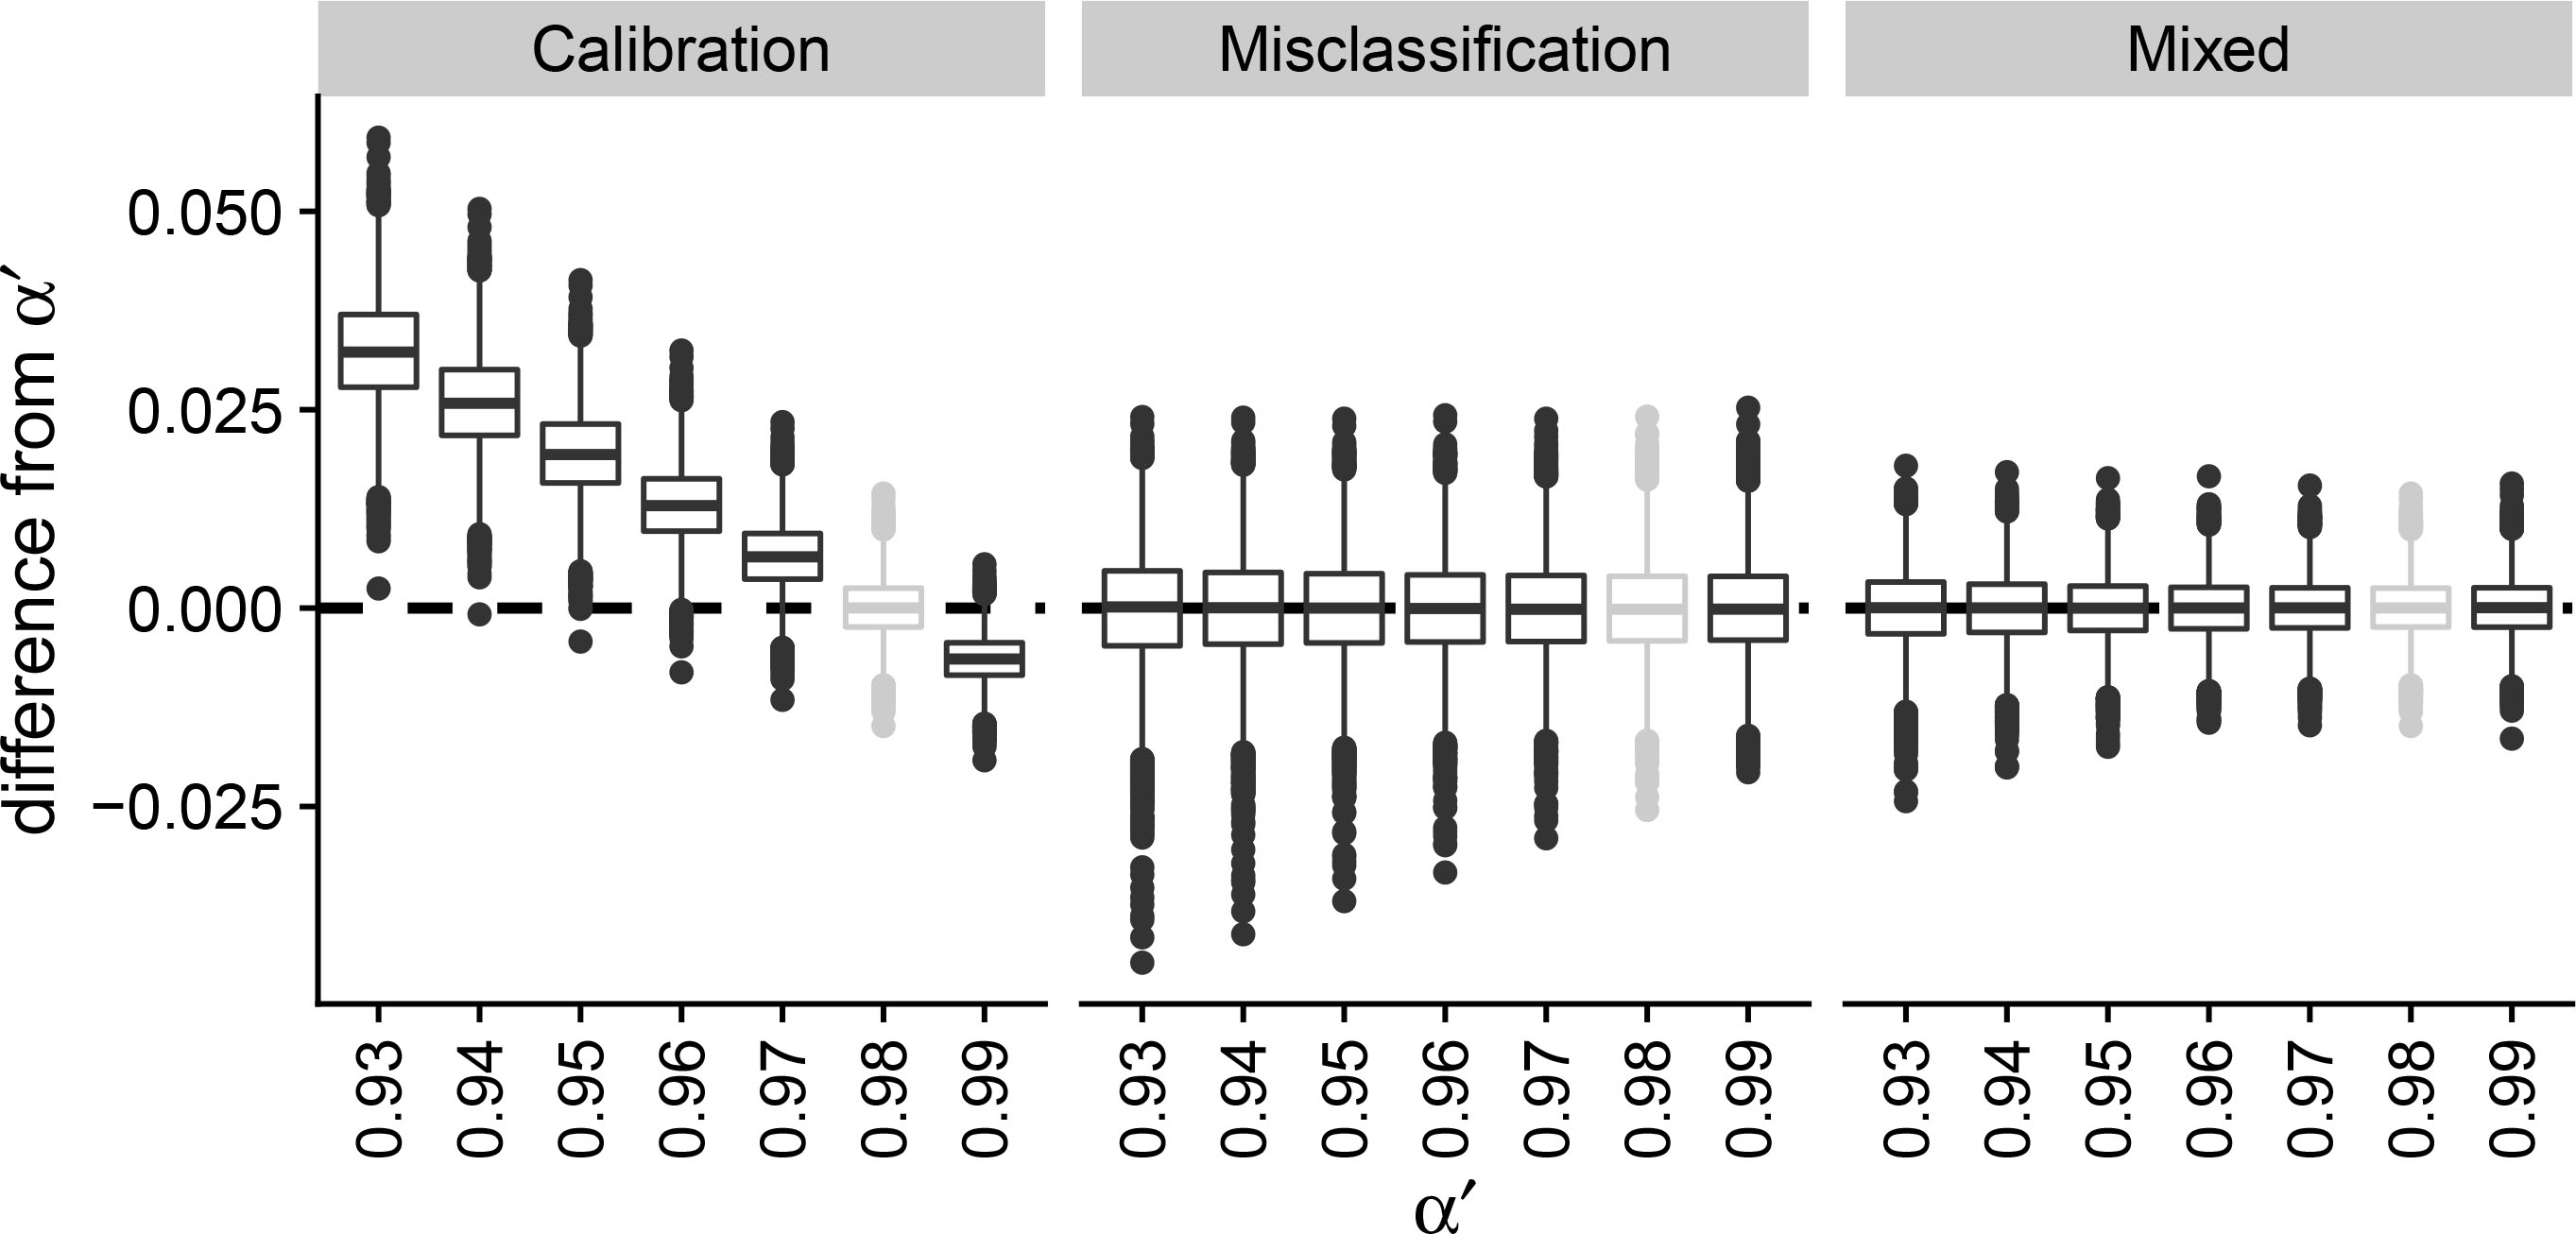 Simulation study to observe the change in prediction error under concept drift using boxplots. The calibration, misclassification and mixed estimator are compared given an initial base rate α=0.98 (grey) and different values of α′ (black). The test set is sampled from the target population with the initial base rate. The x-axis shows the different base rates and the y-axis shows the distribution of the difference from the new base rate α′. All the parameters: p00=0.94, p11=0.97, n=1,000N=3×105 and B=10,000.